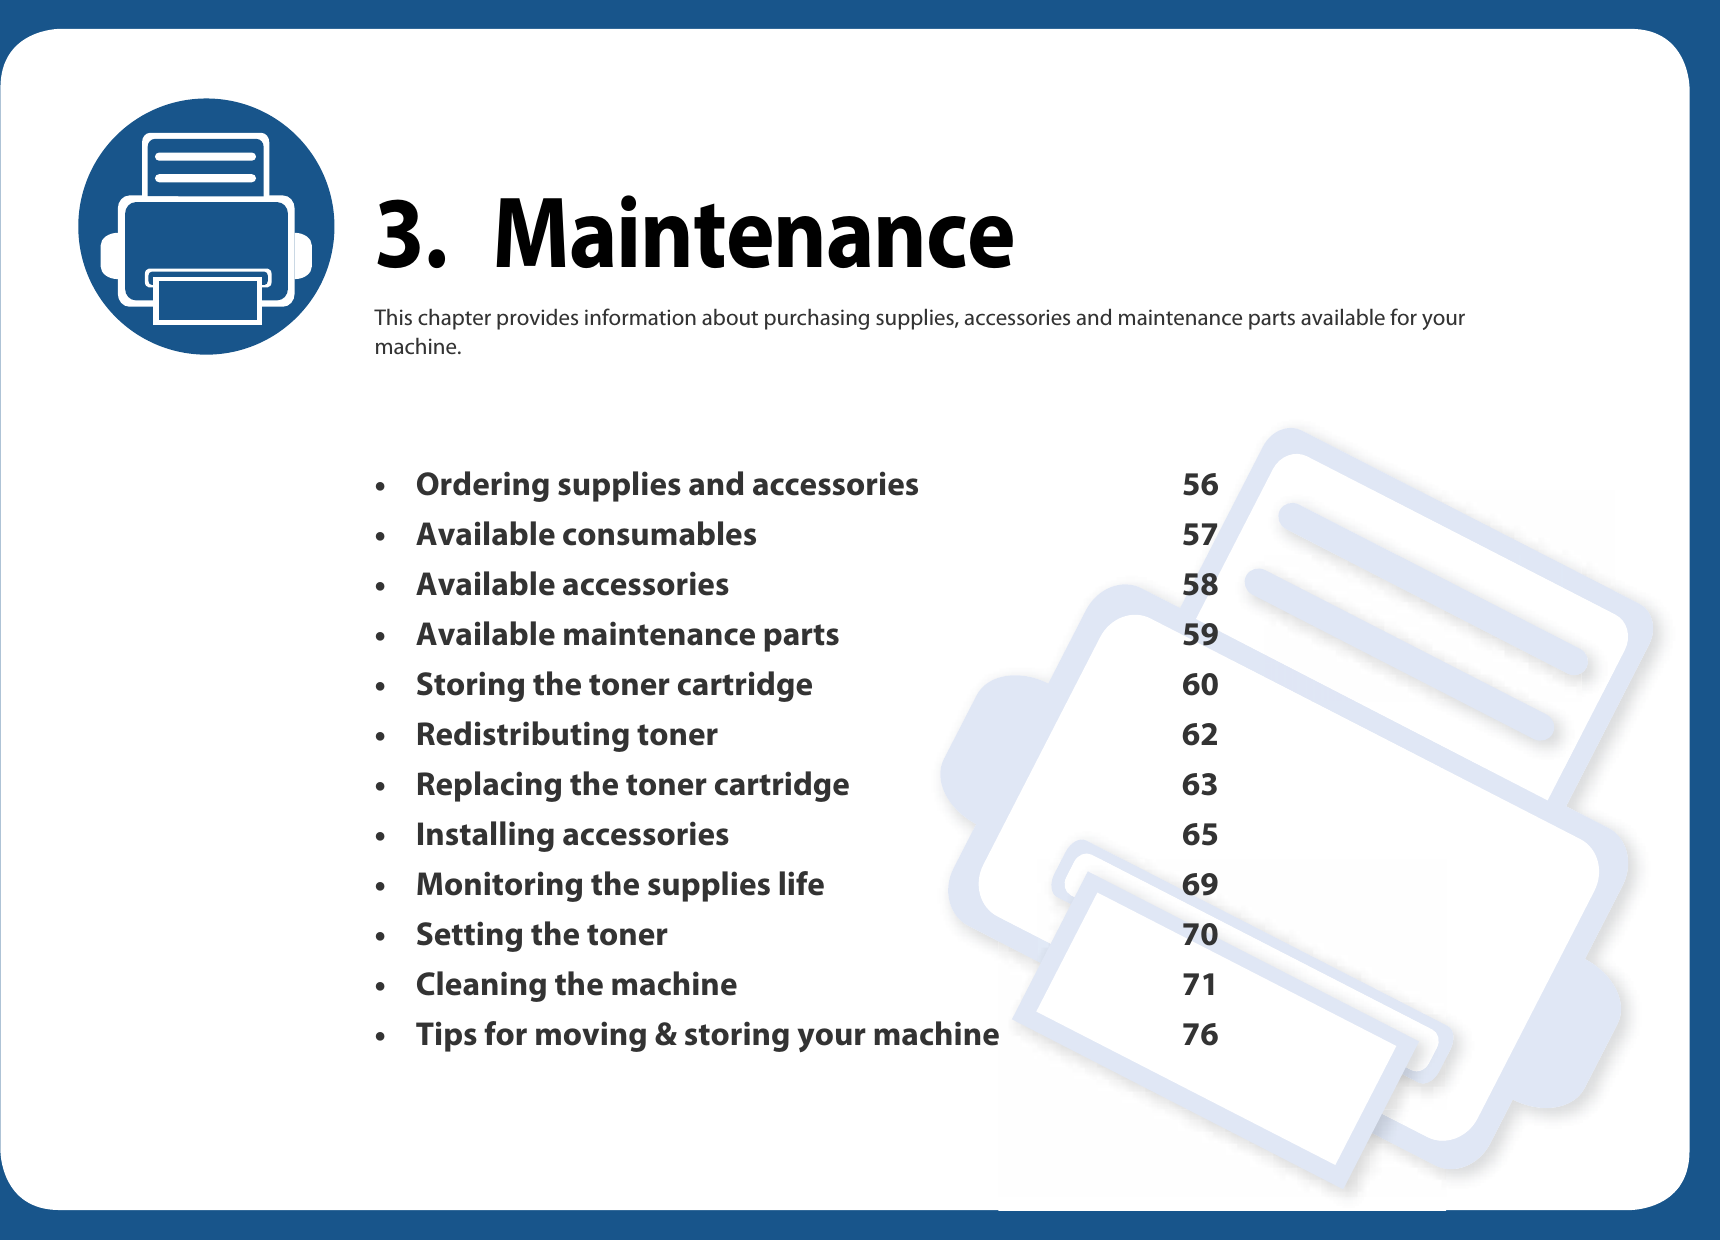 3. MaintenanceThis chapter provides information about purchasing supplies, accessories and maintenance parts available for your machine.• Ordering supplies and accessories 56• Available consumables 57• Available accessories 58• Available maintenance parts 59• Storing the toner cartridge 60• Redistributing toner 62• Replacing the toner cartridge 63• Installing accessories 65• Monitoring the supplies life 69• Setting the toner 70• Cleaning the machine 71• Tips for moving &amp; storing your machine 76